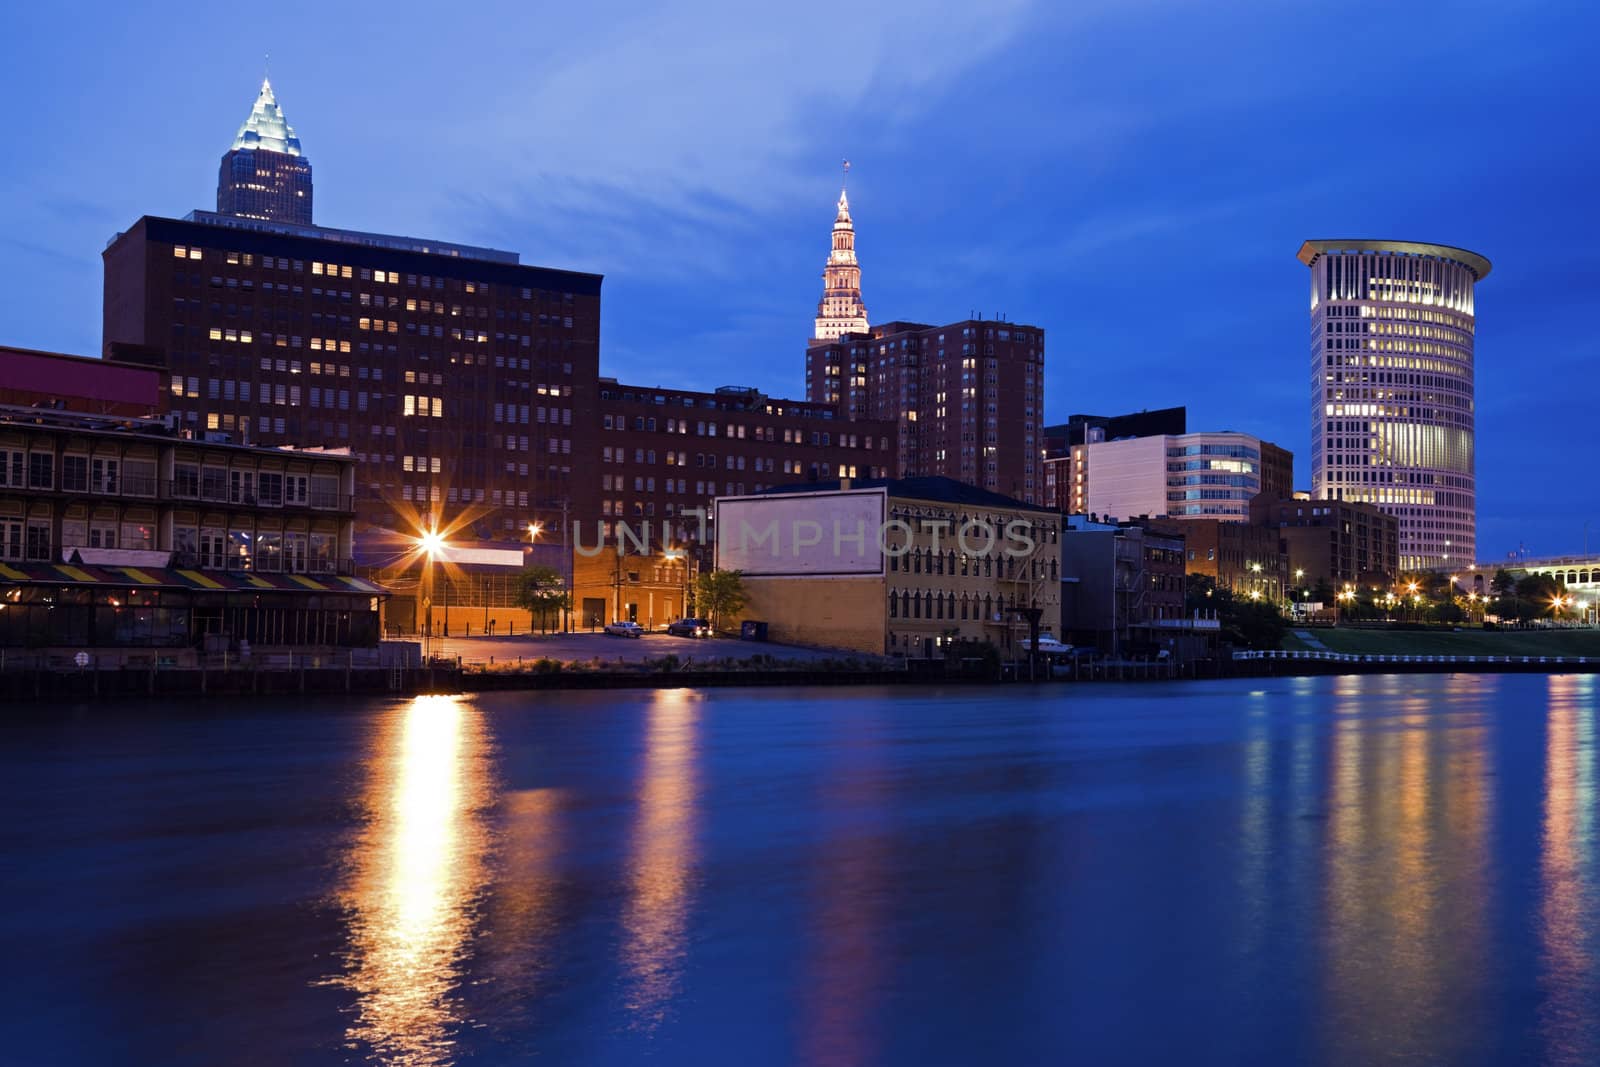 Evening by the river in downtown Cleveland, Ohio.